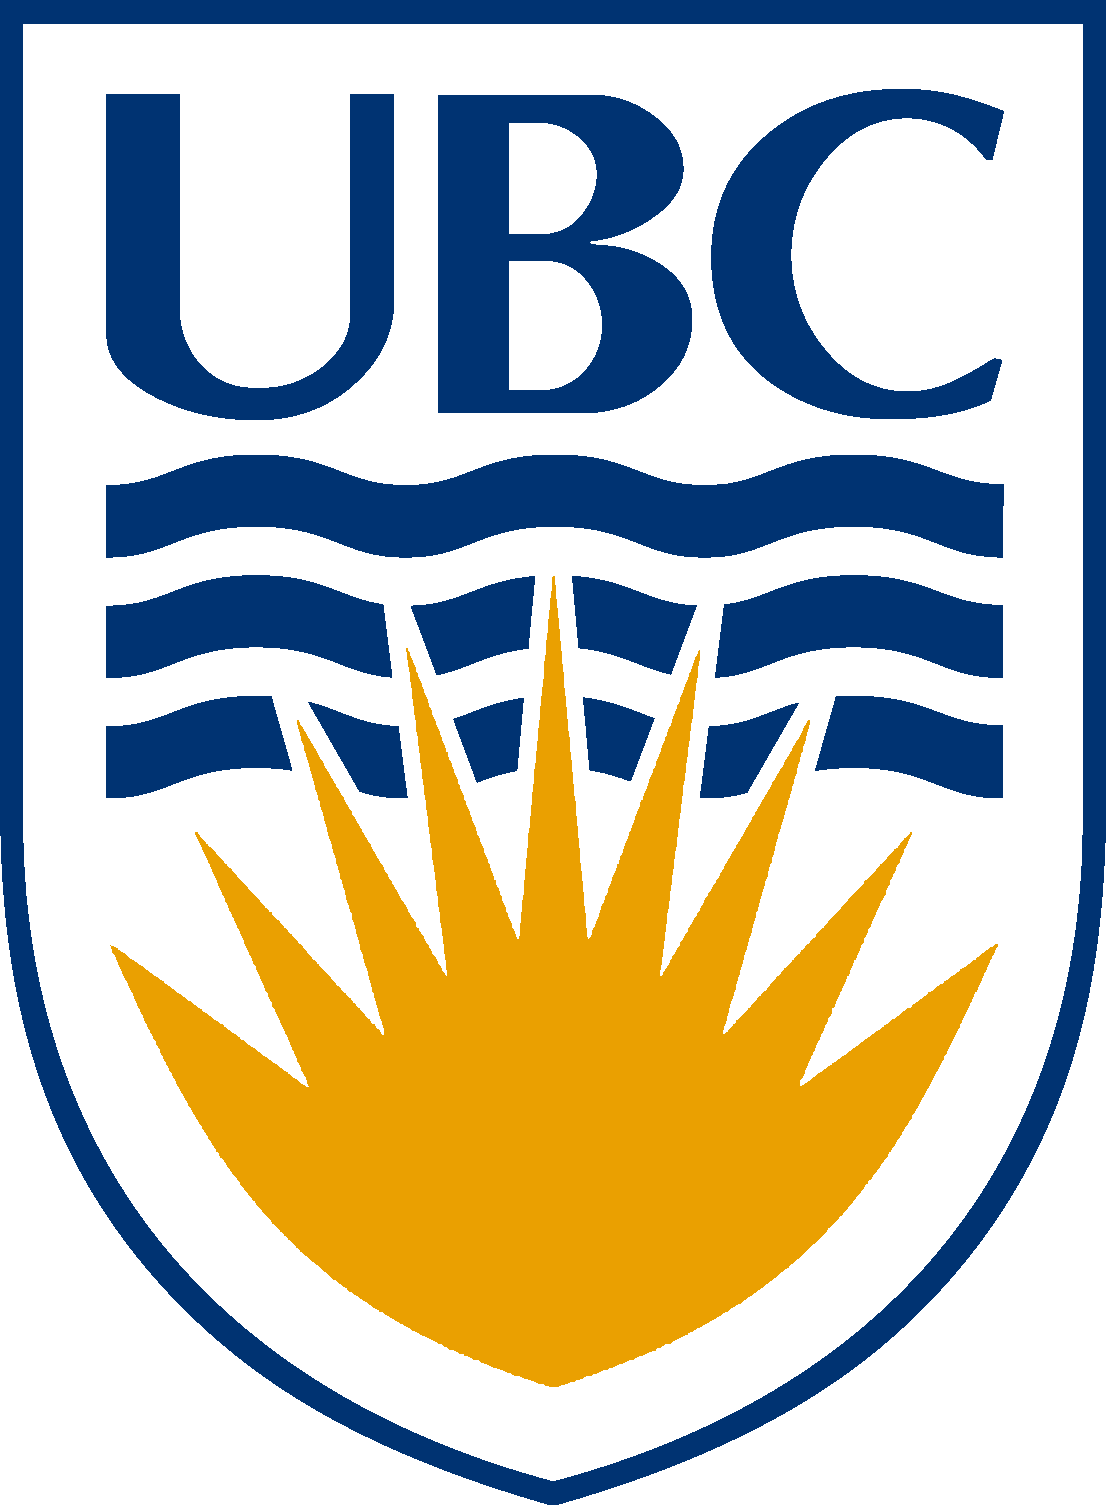 this site is dedicated to UBC:Botany's study of Bryophytes in the Bamfield area